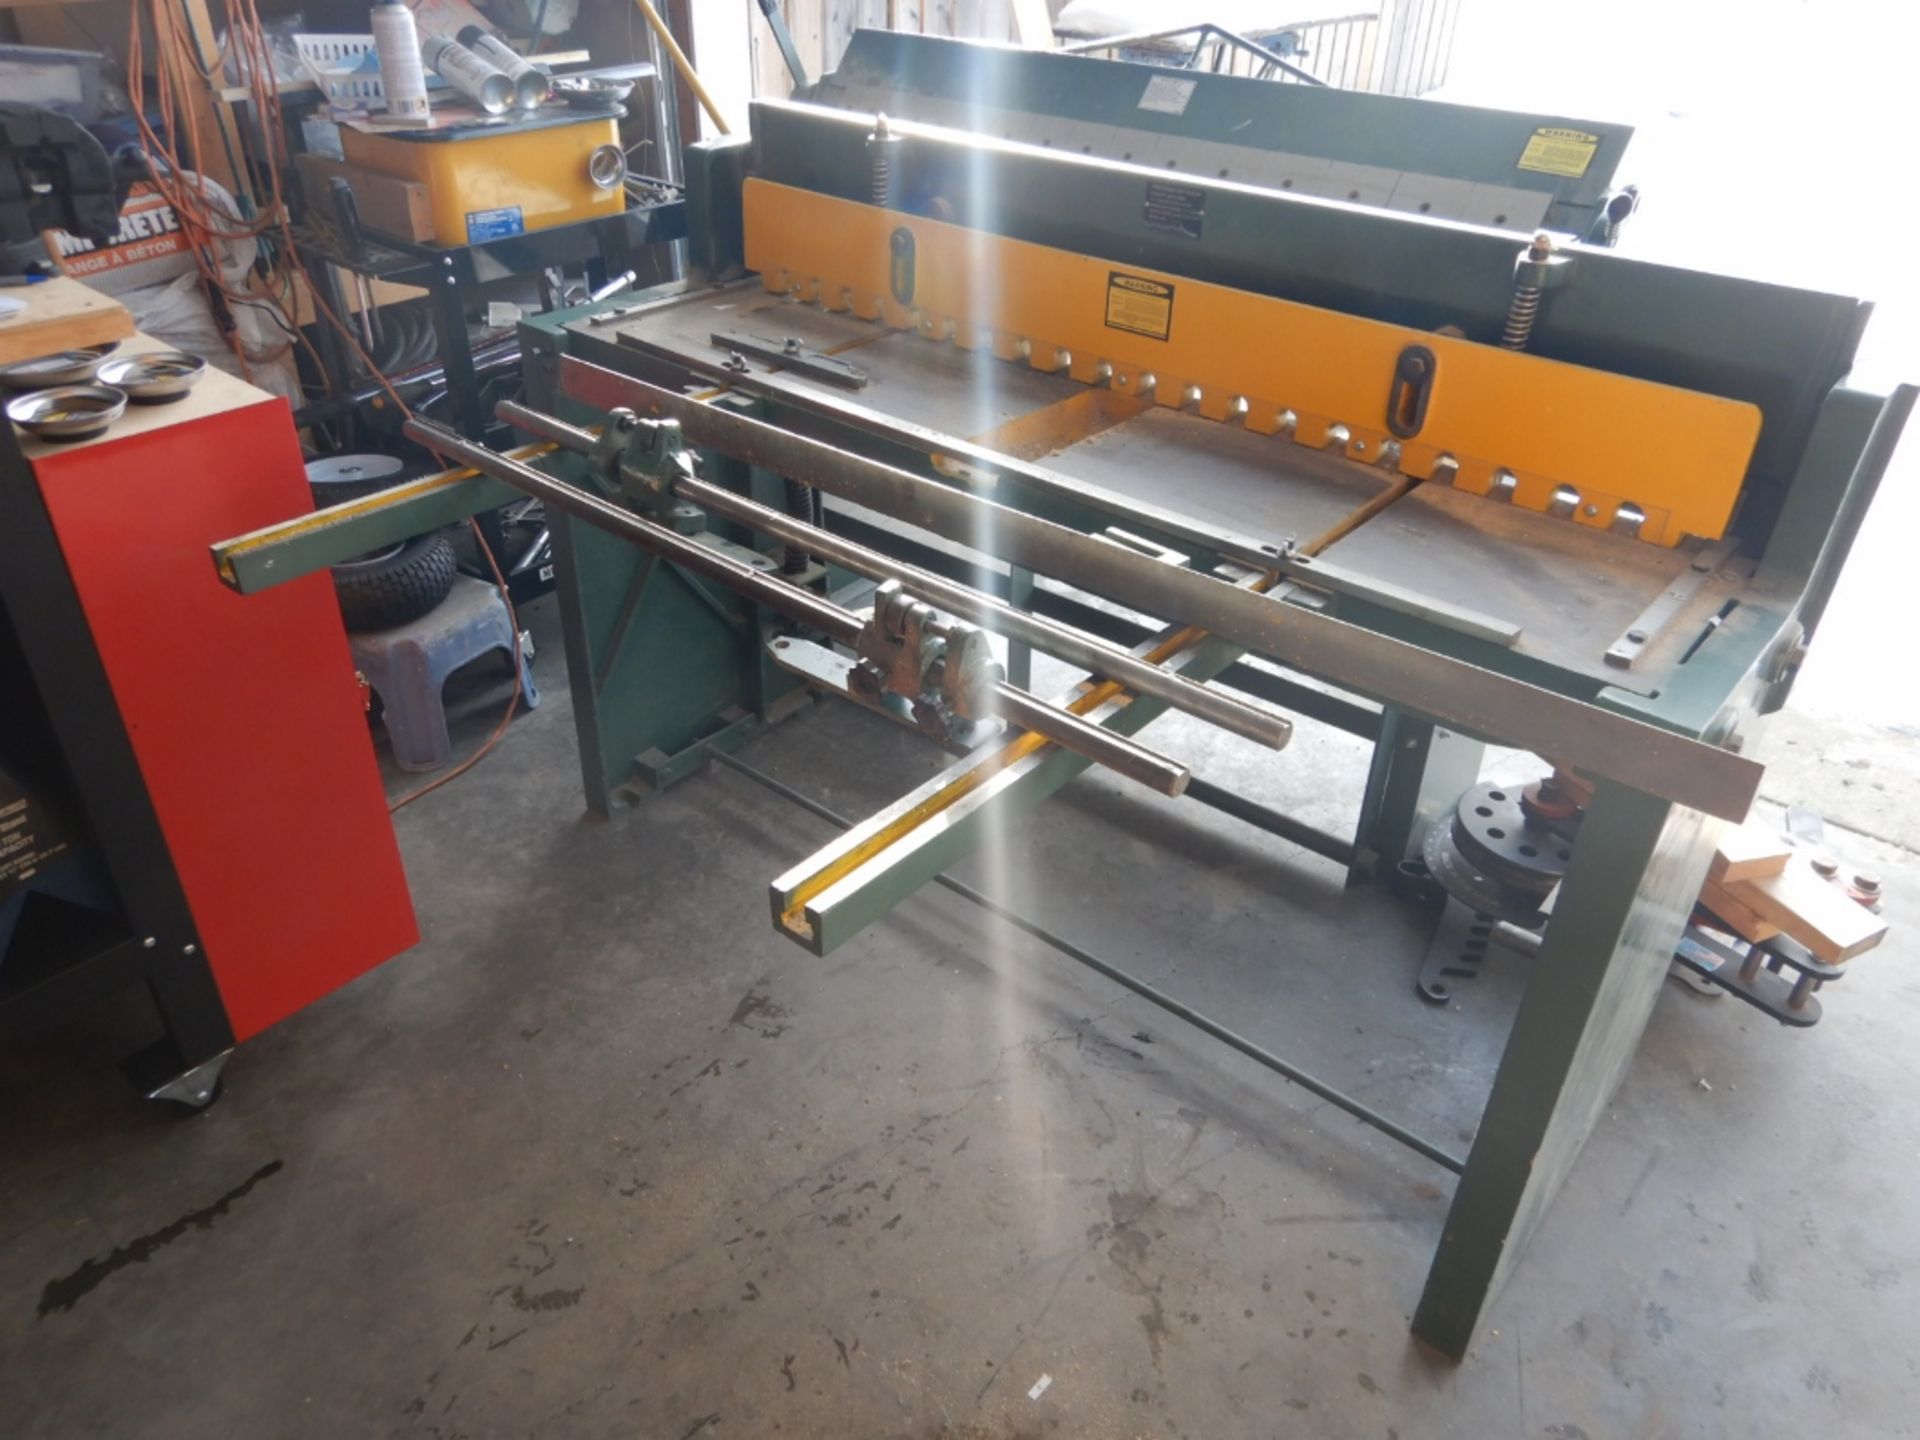 BUSY BEE PRECISION FOOT SHEAR, 52"X16 GA S/N 111117, USED ONCE. LOCATED @ MORNINGSIDE. TO VIEW